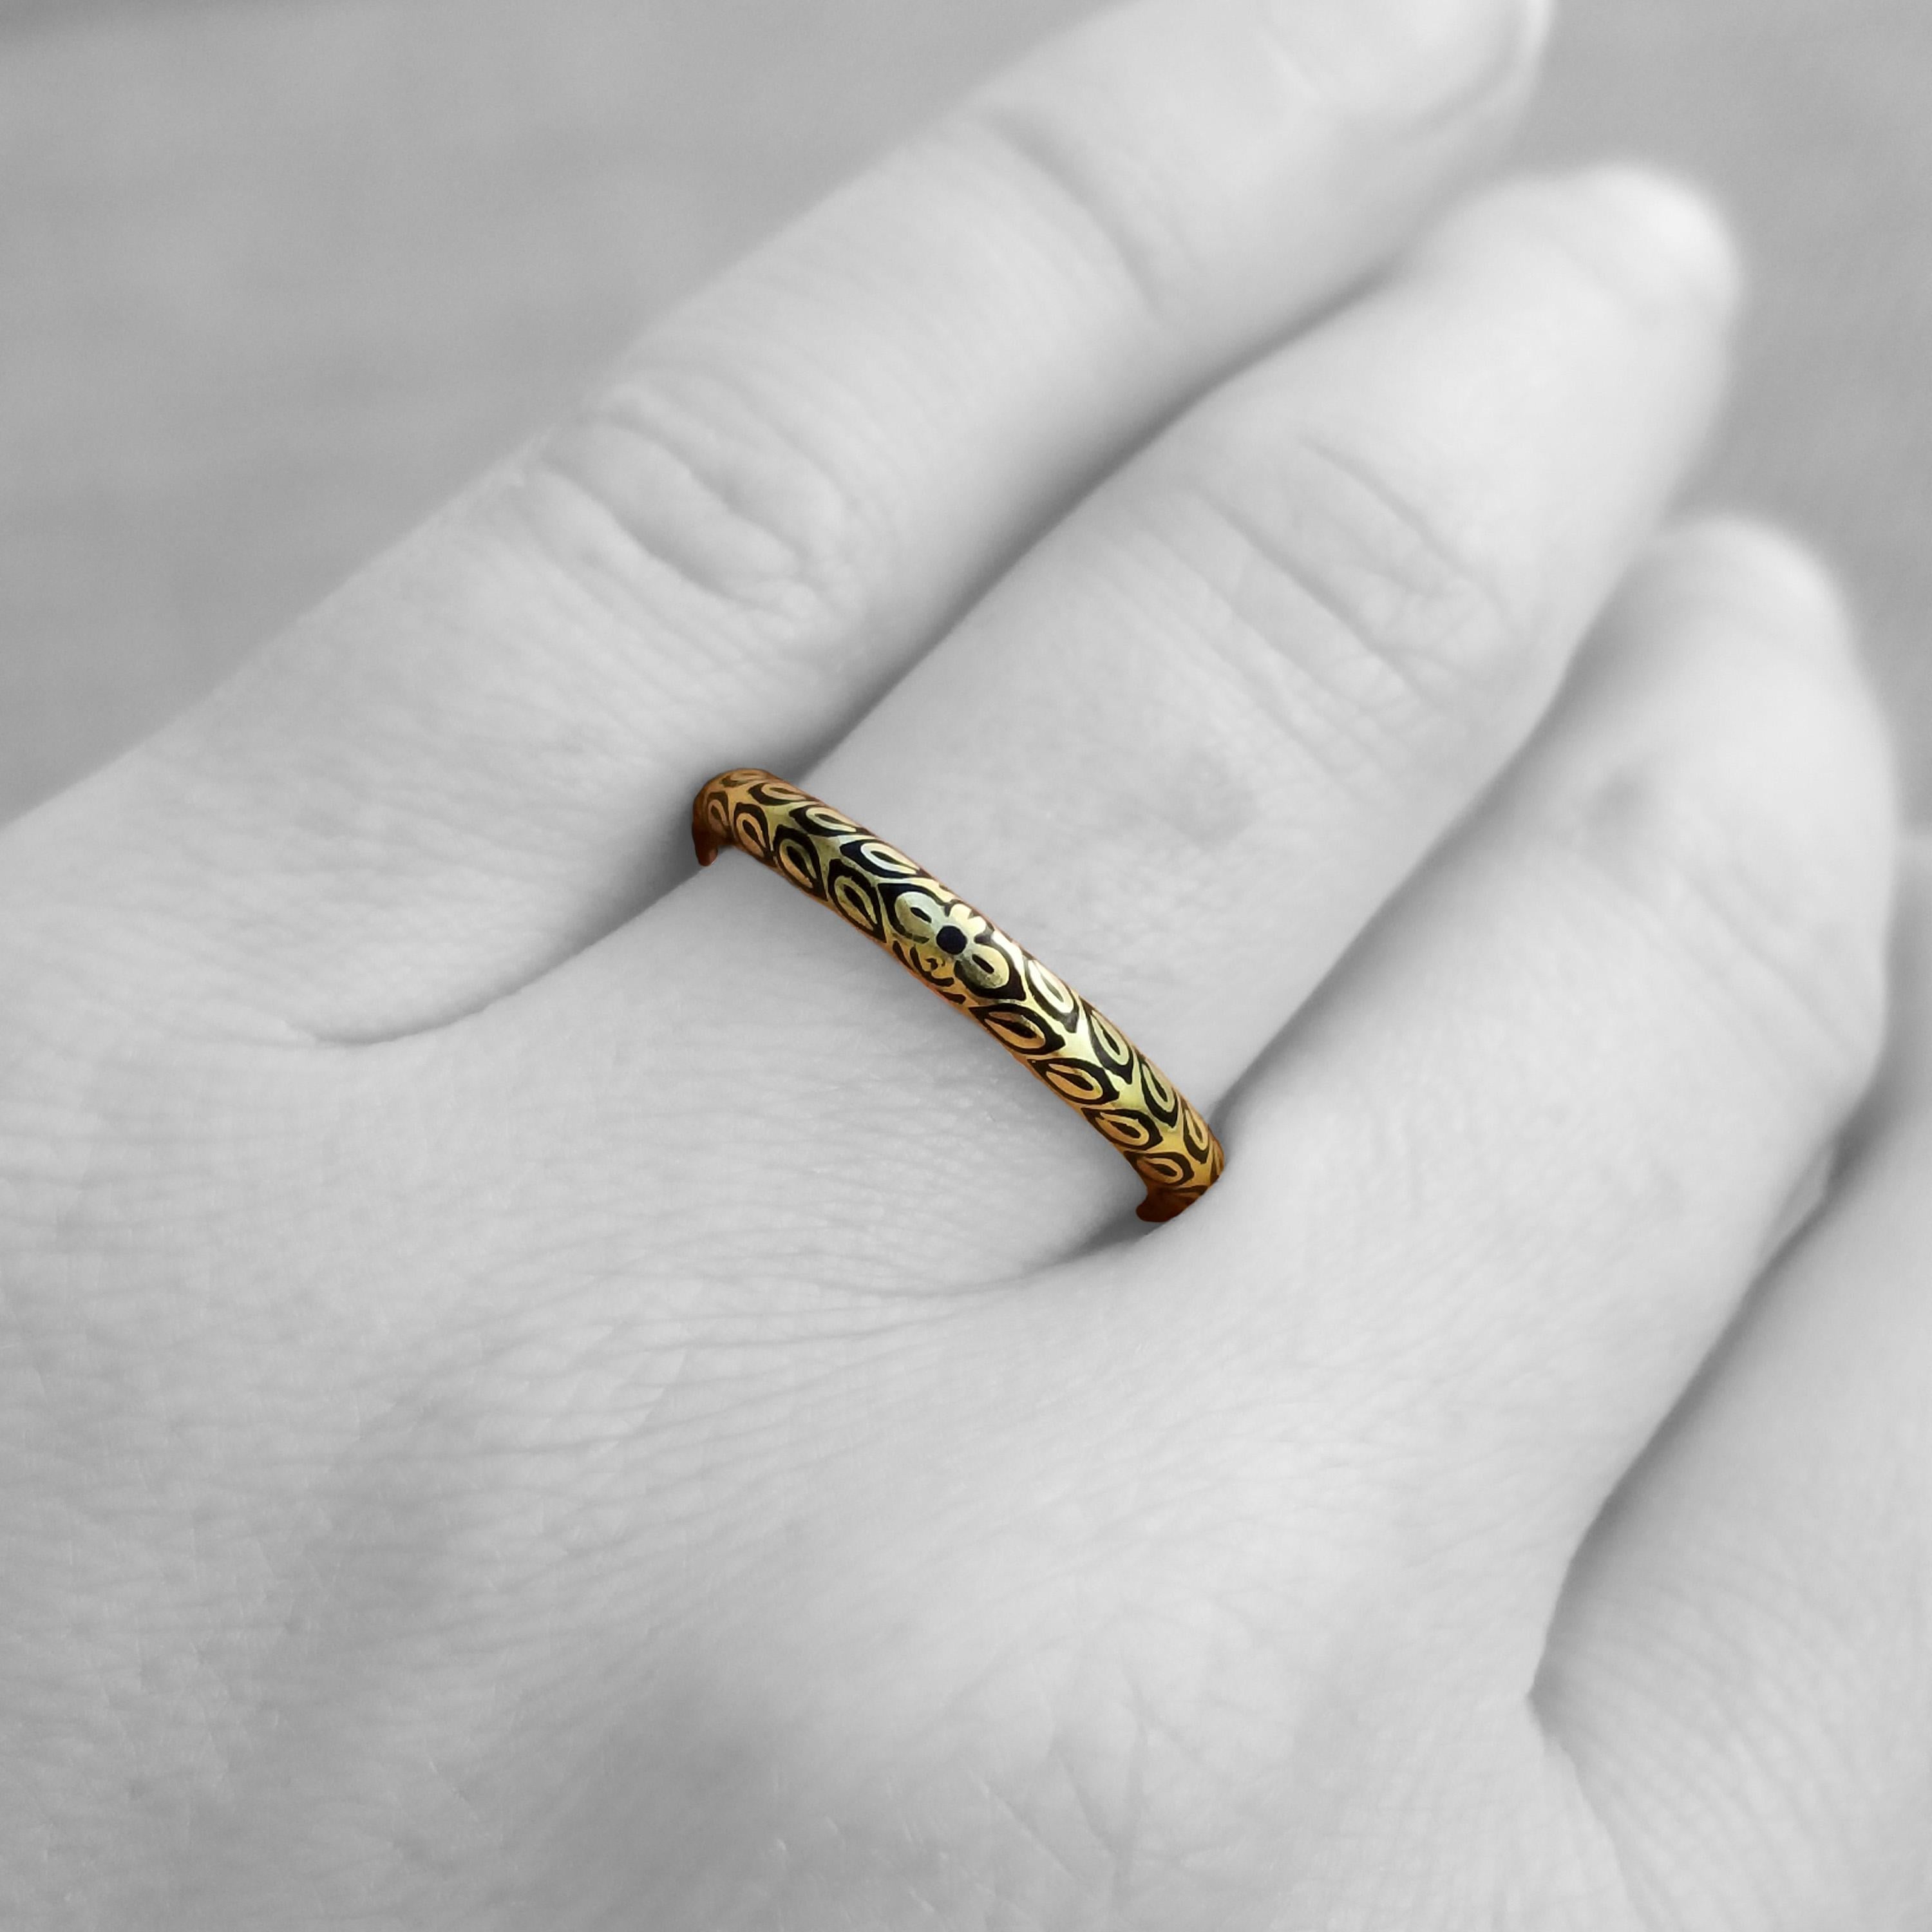 The Zahra Bands are a modern take on a classic style. The enameled floral centerpiece is balanced round the entirety of the band with a repeating enameled leaf motif. The richly colored enamel pops dramatically against this 18kt gold band.

-Black